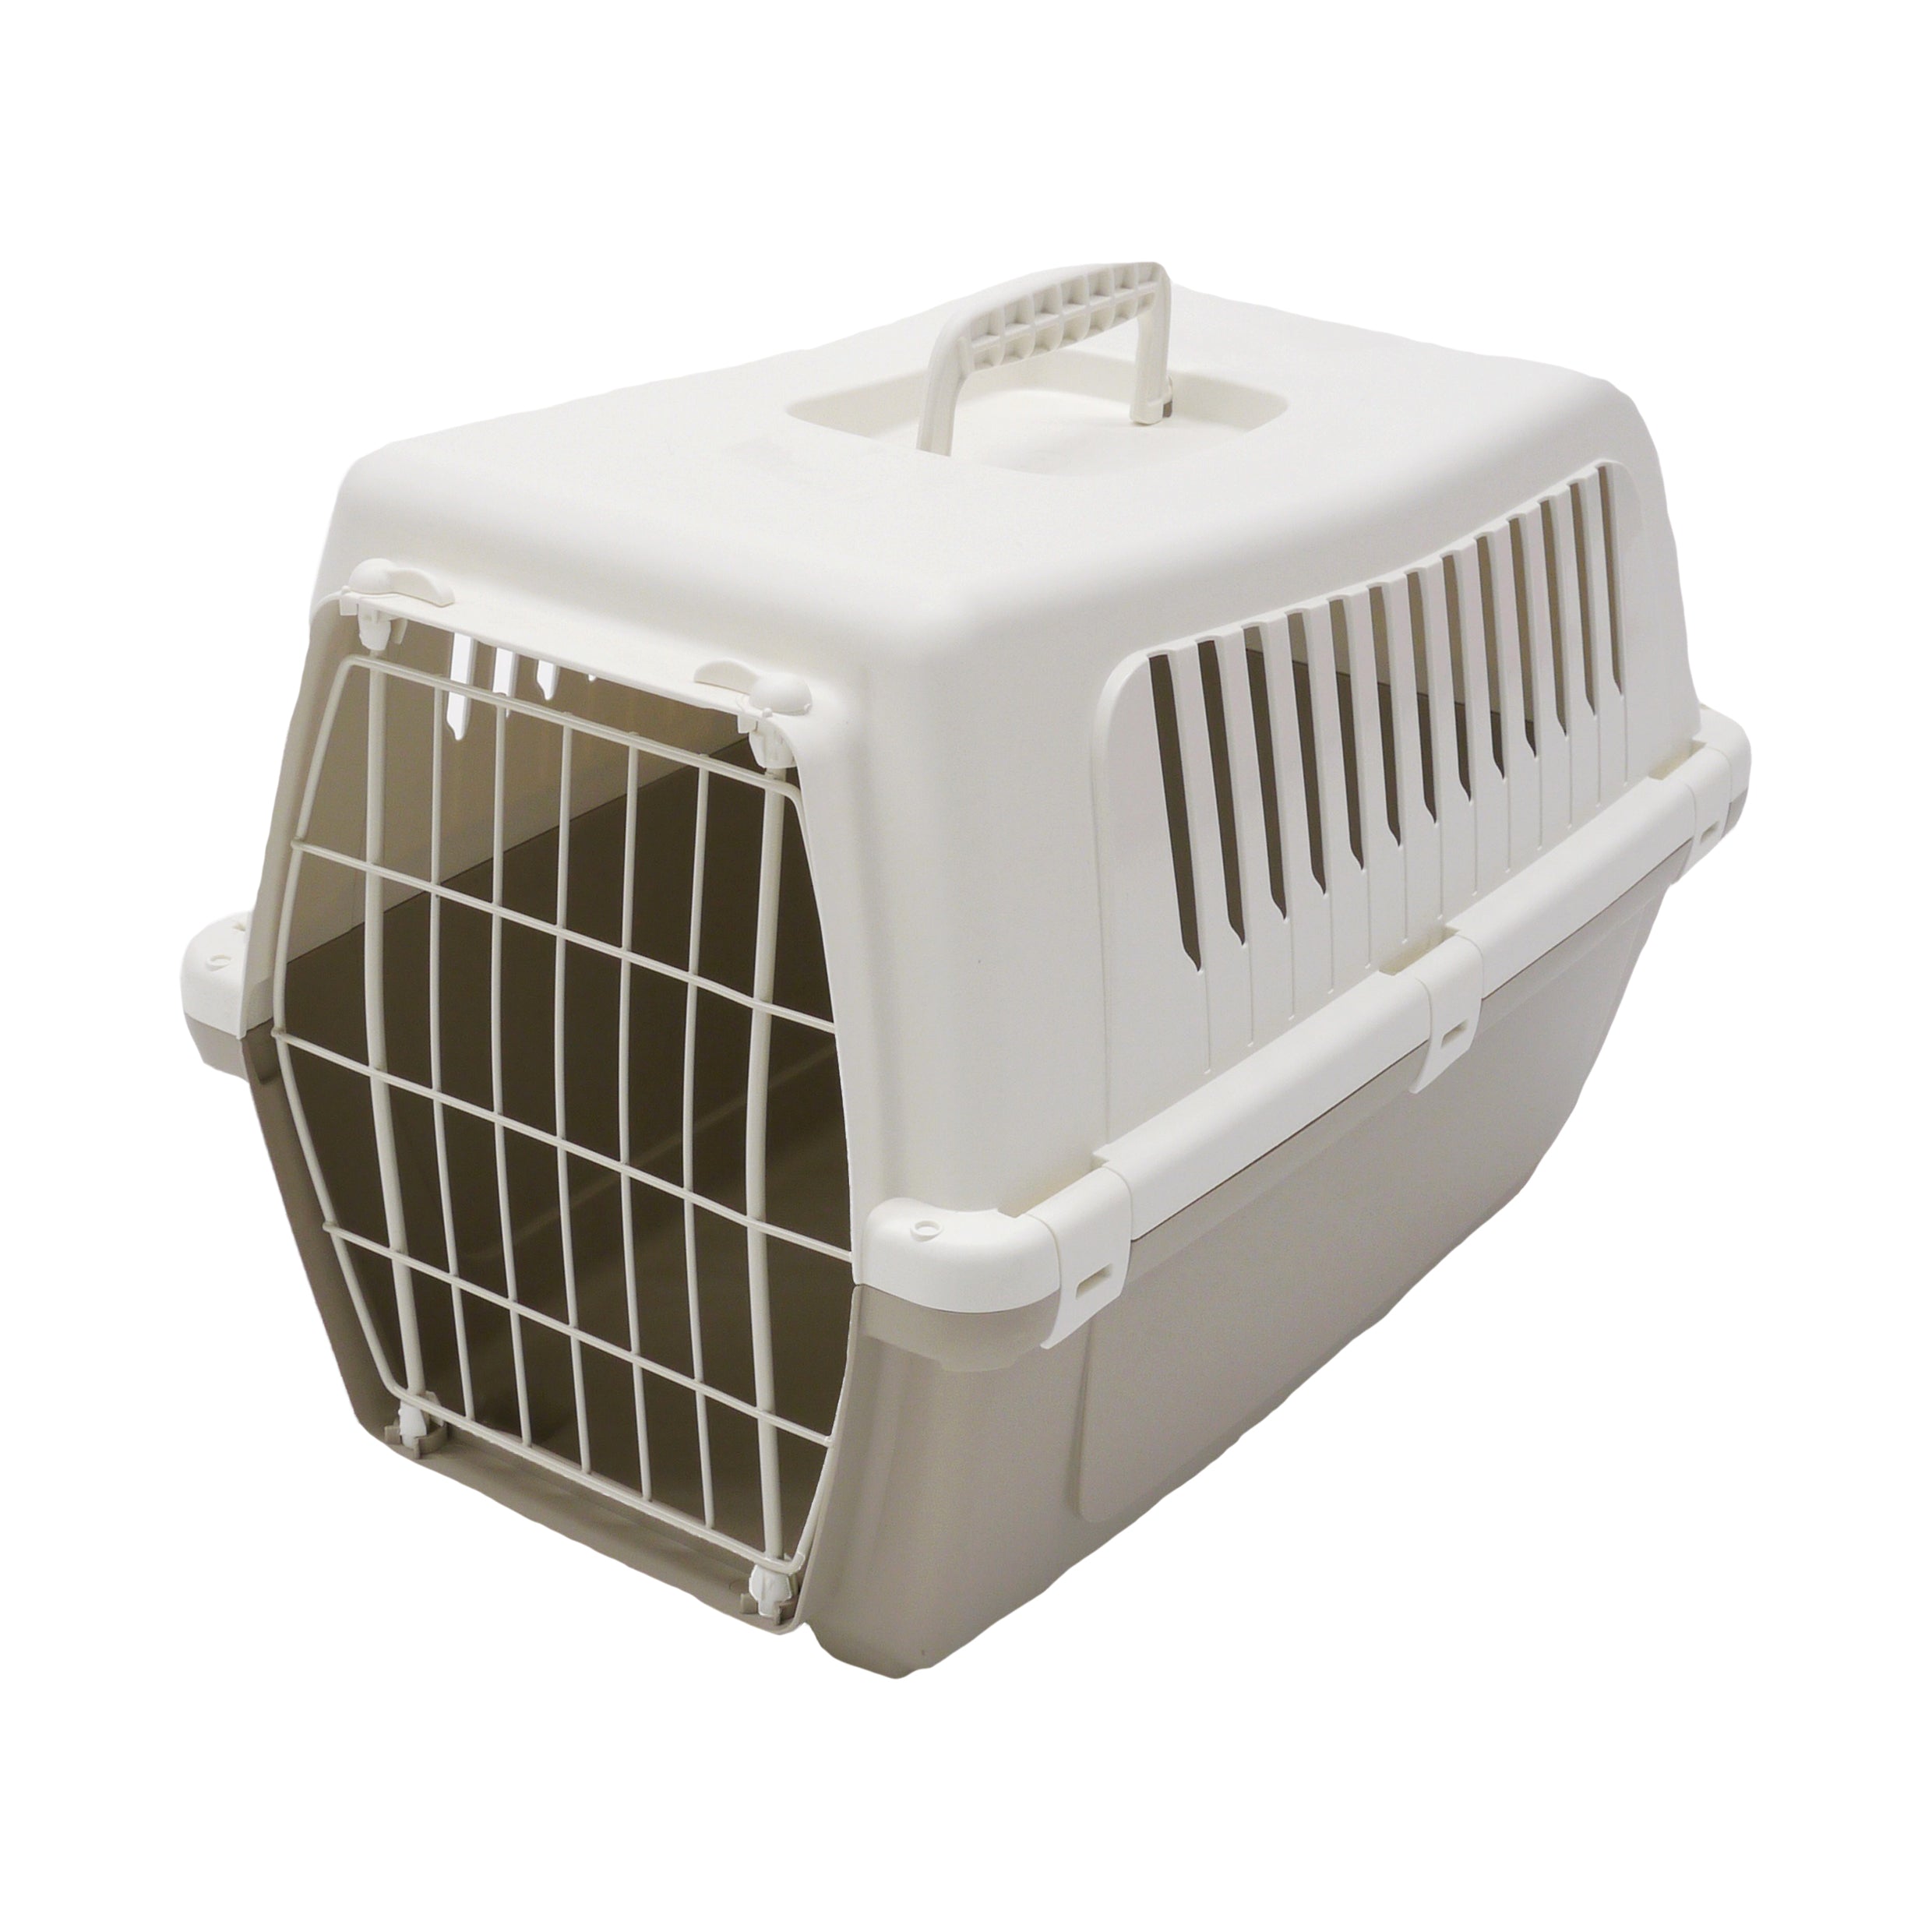 Rosewood Vision Classic 50cm Pet Carrier